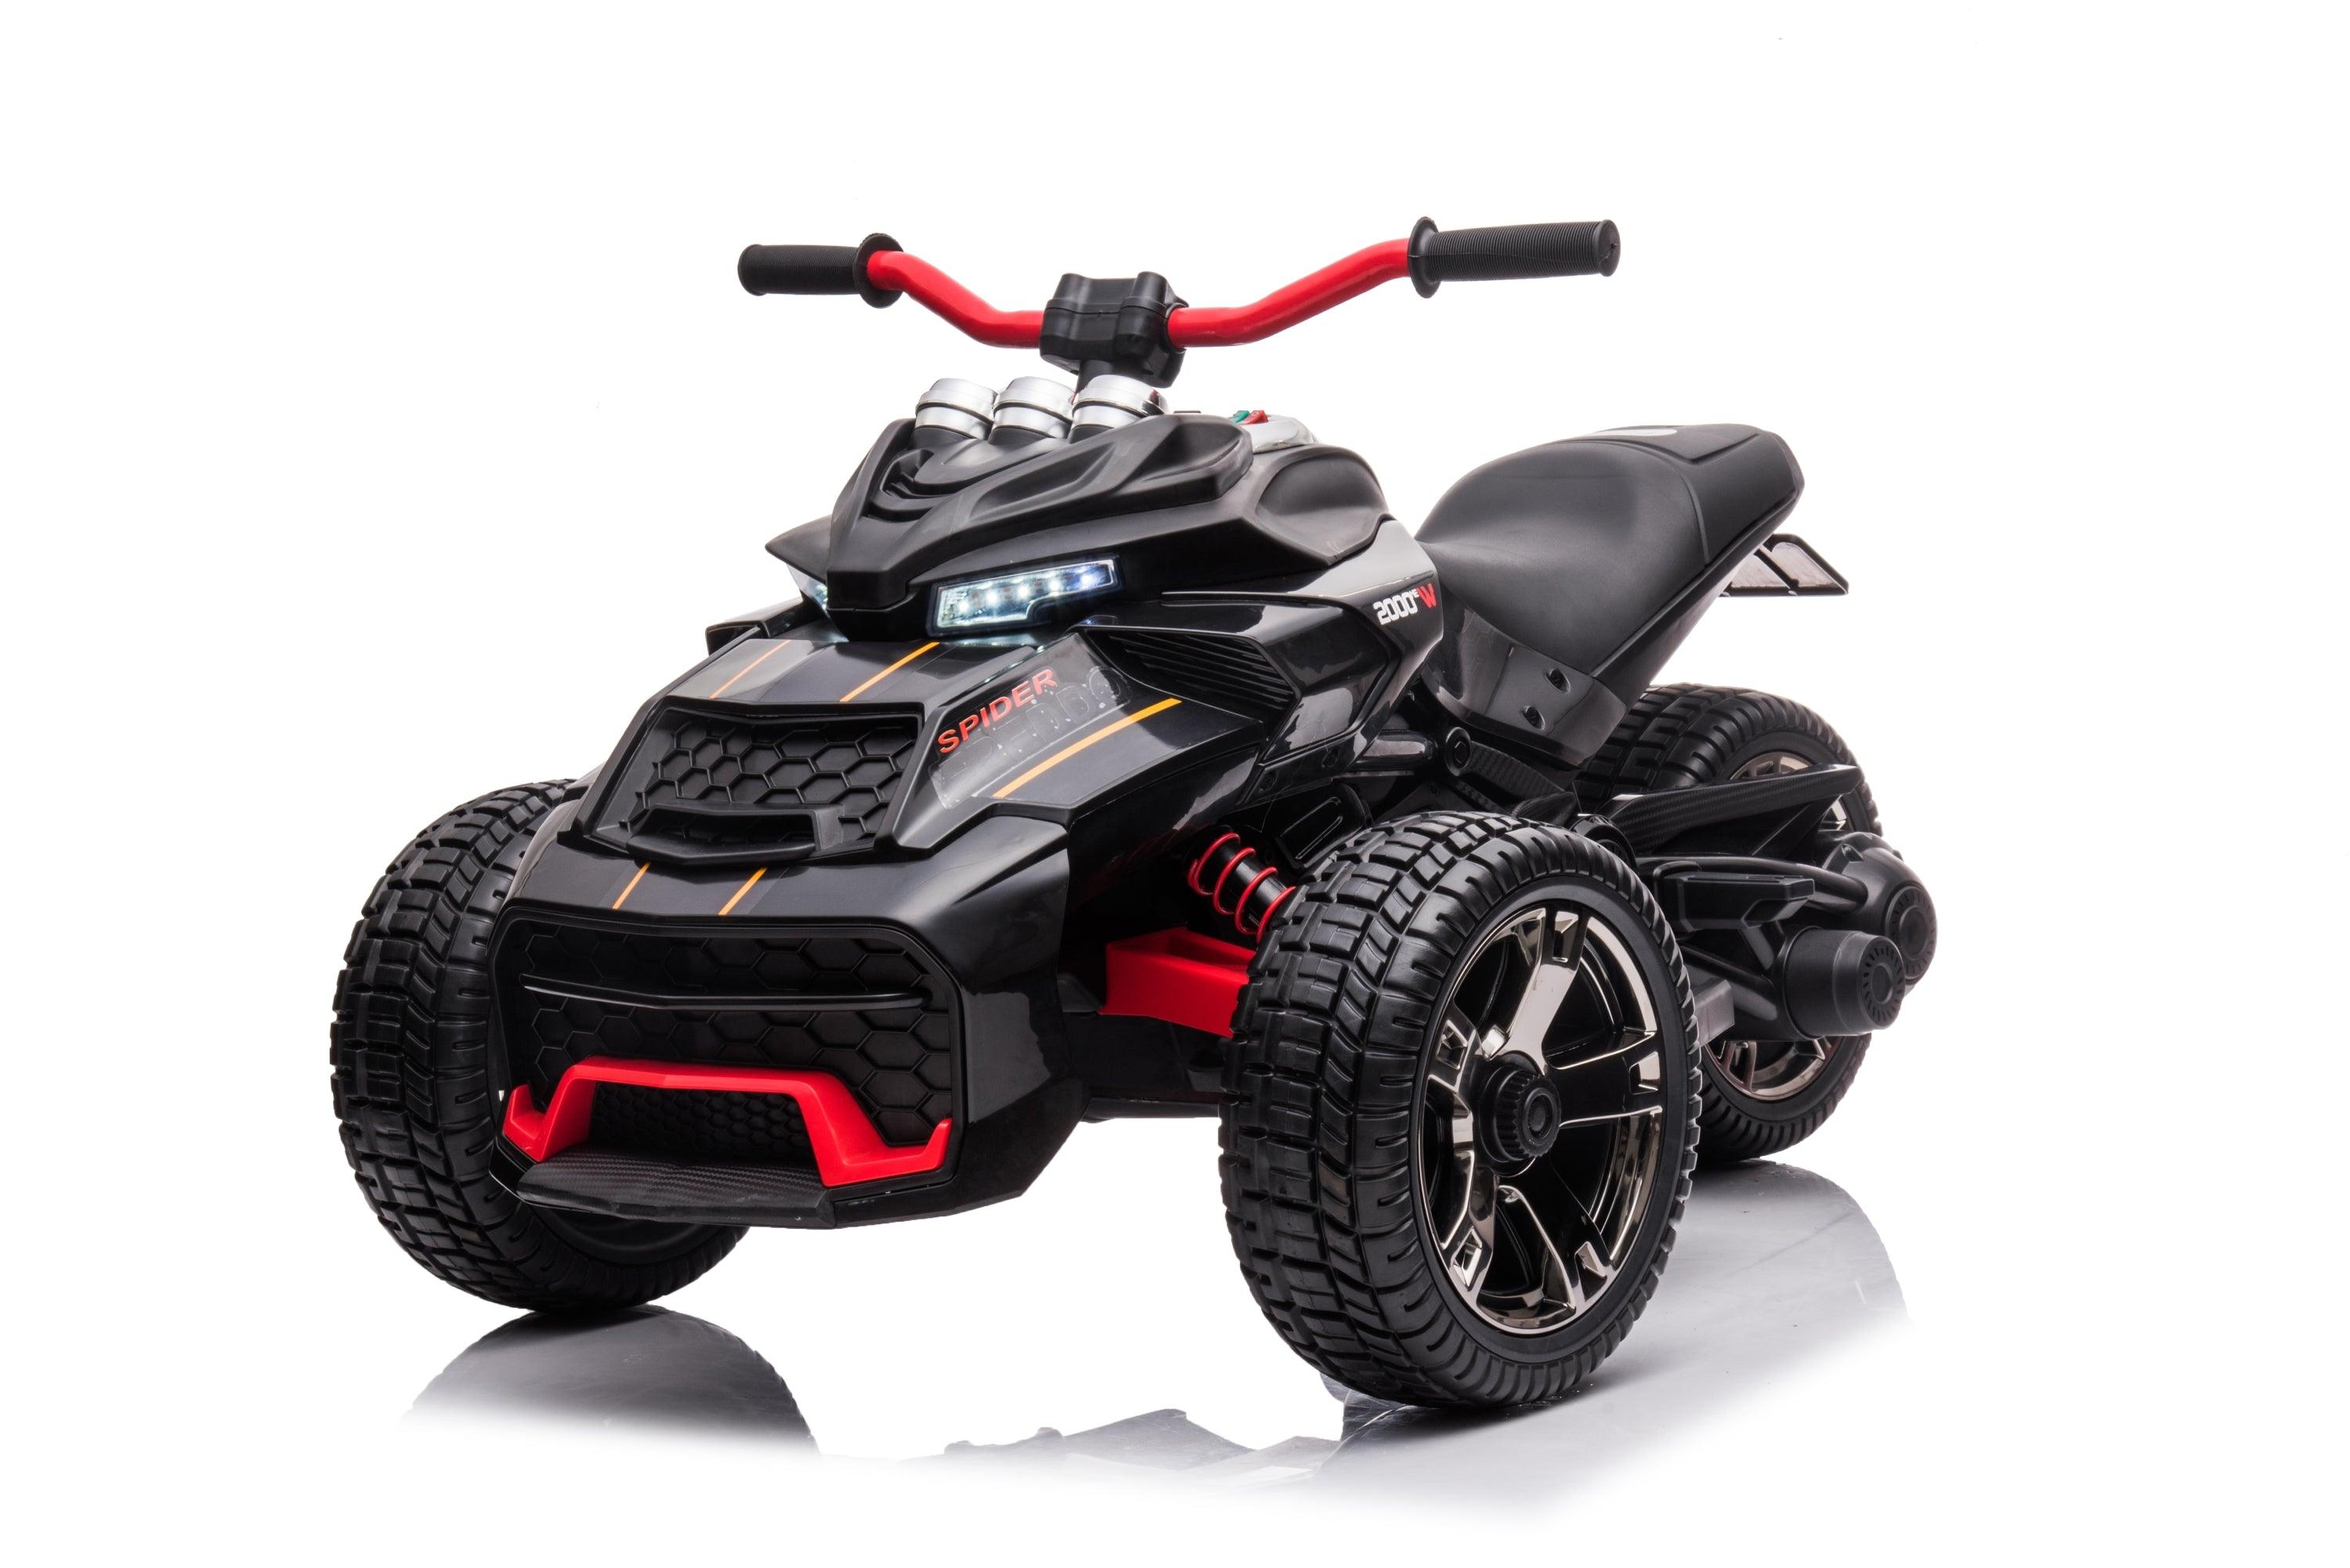 2022 12V Freddo 3 Wheel 2 Seater Ride on Motorcycle Trike With Upgraded Battery - American Kids Cars